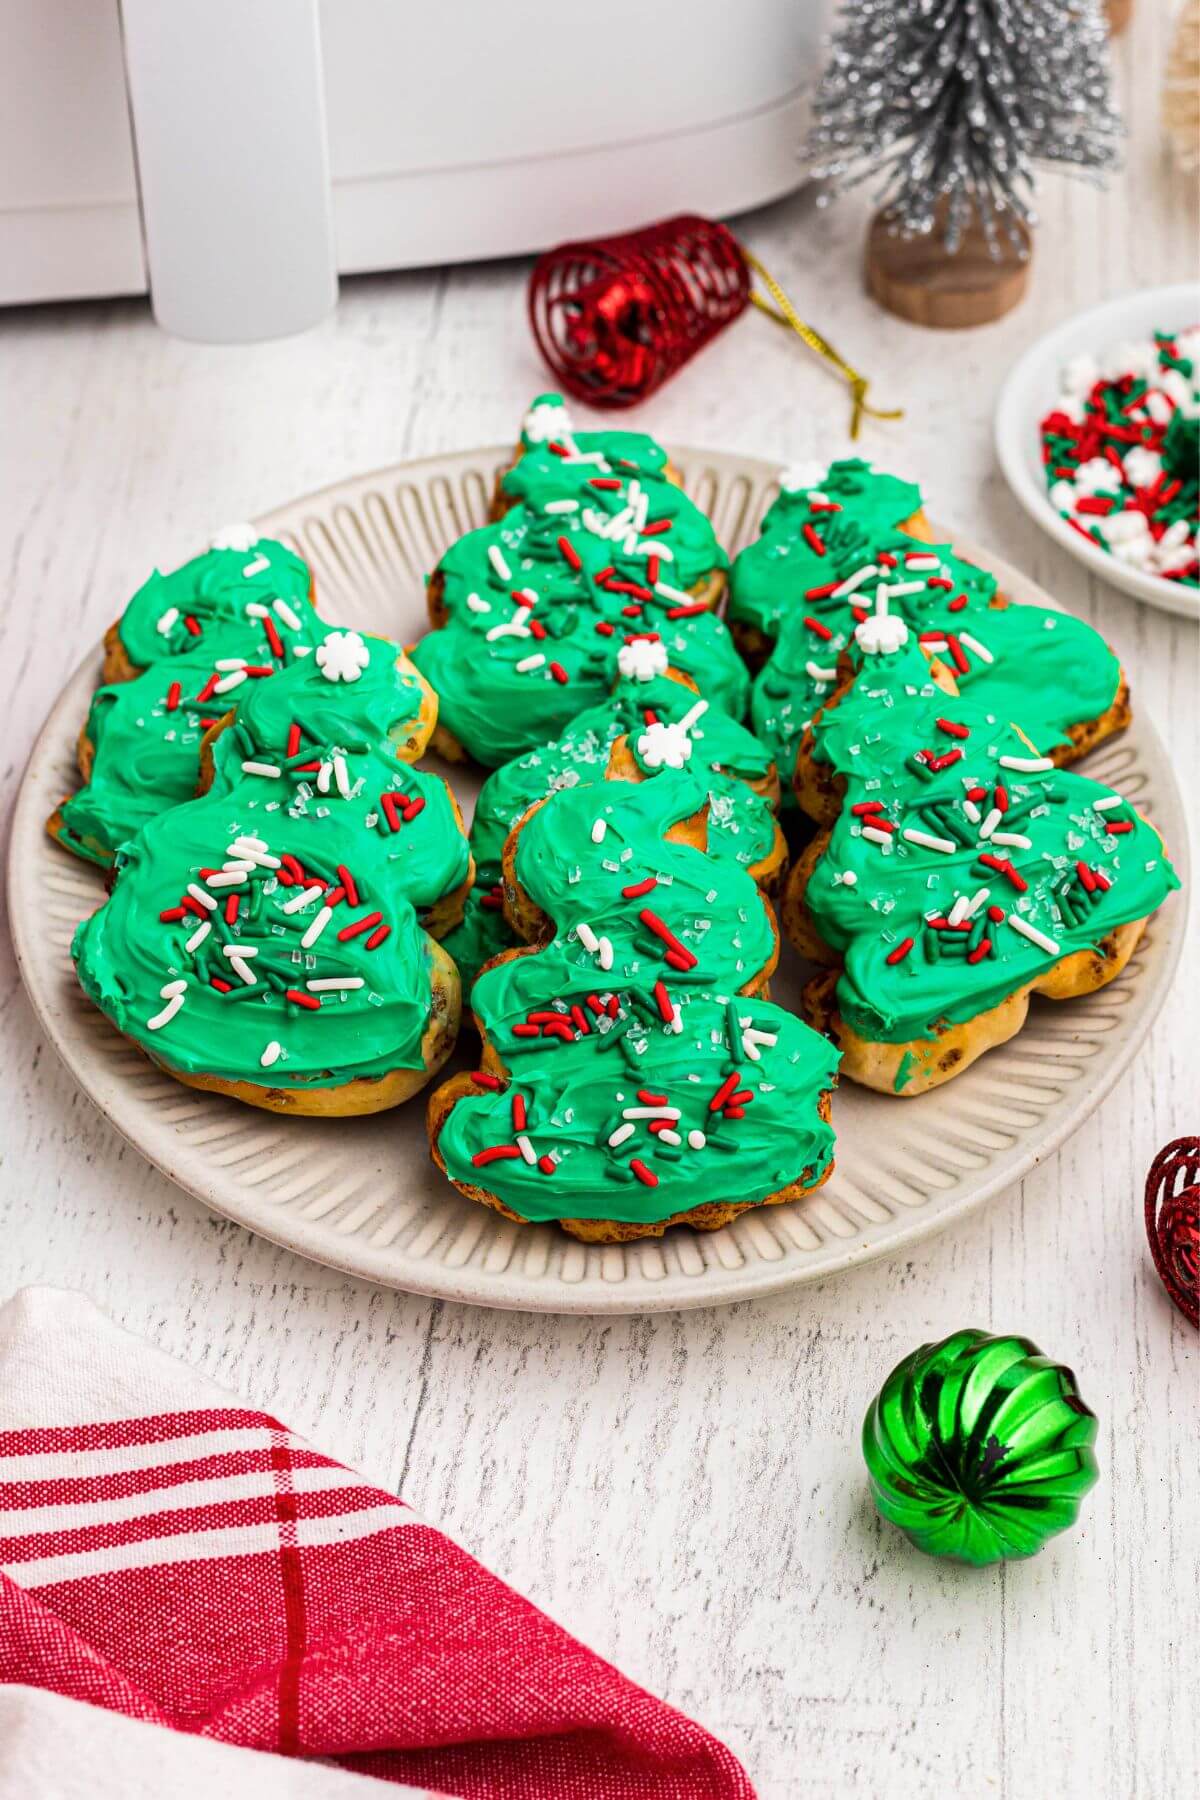 Golden cinnamon rolls frosted with green icing and decorated with holiday sprinkles on a cream plate. 